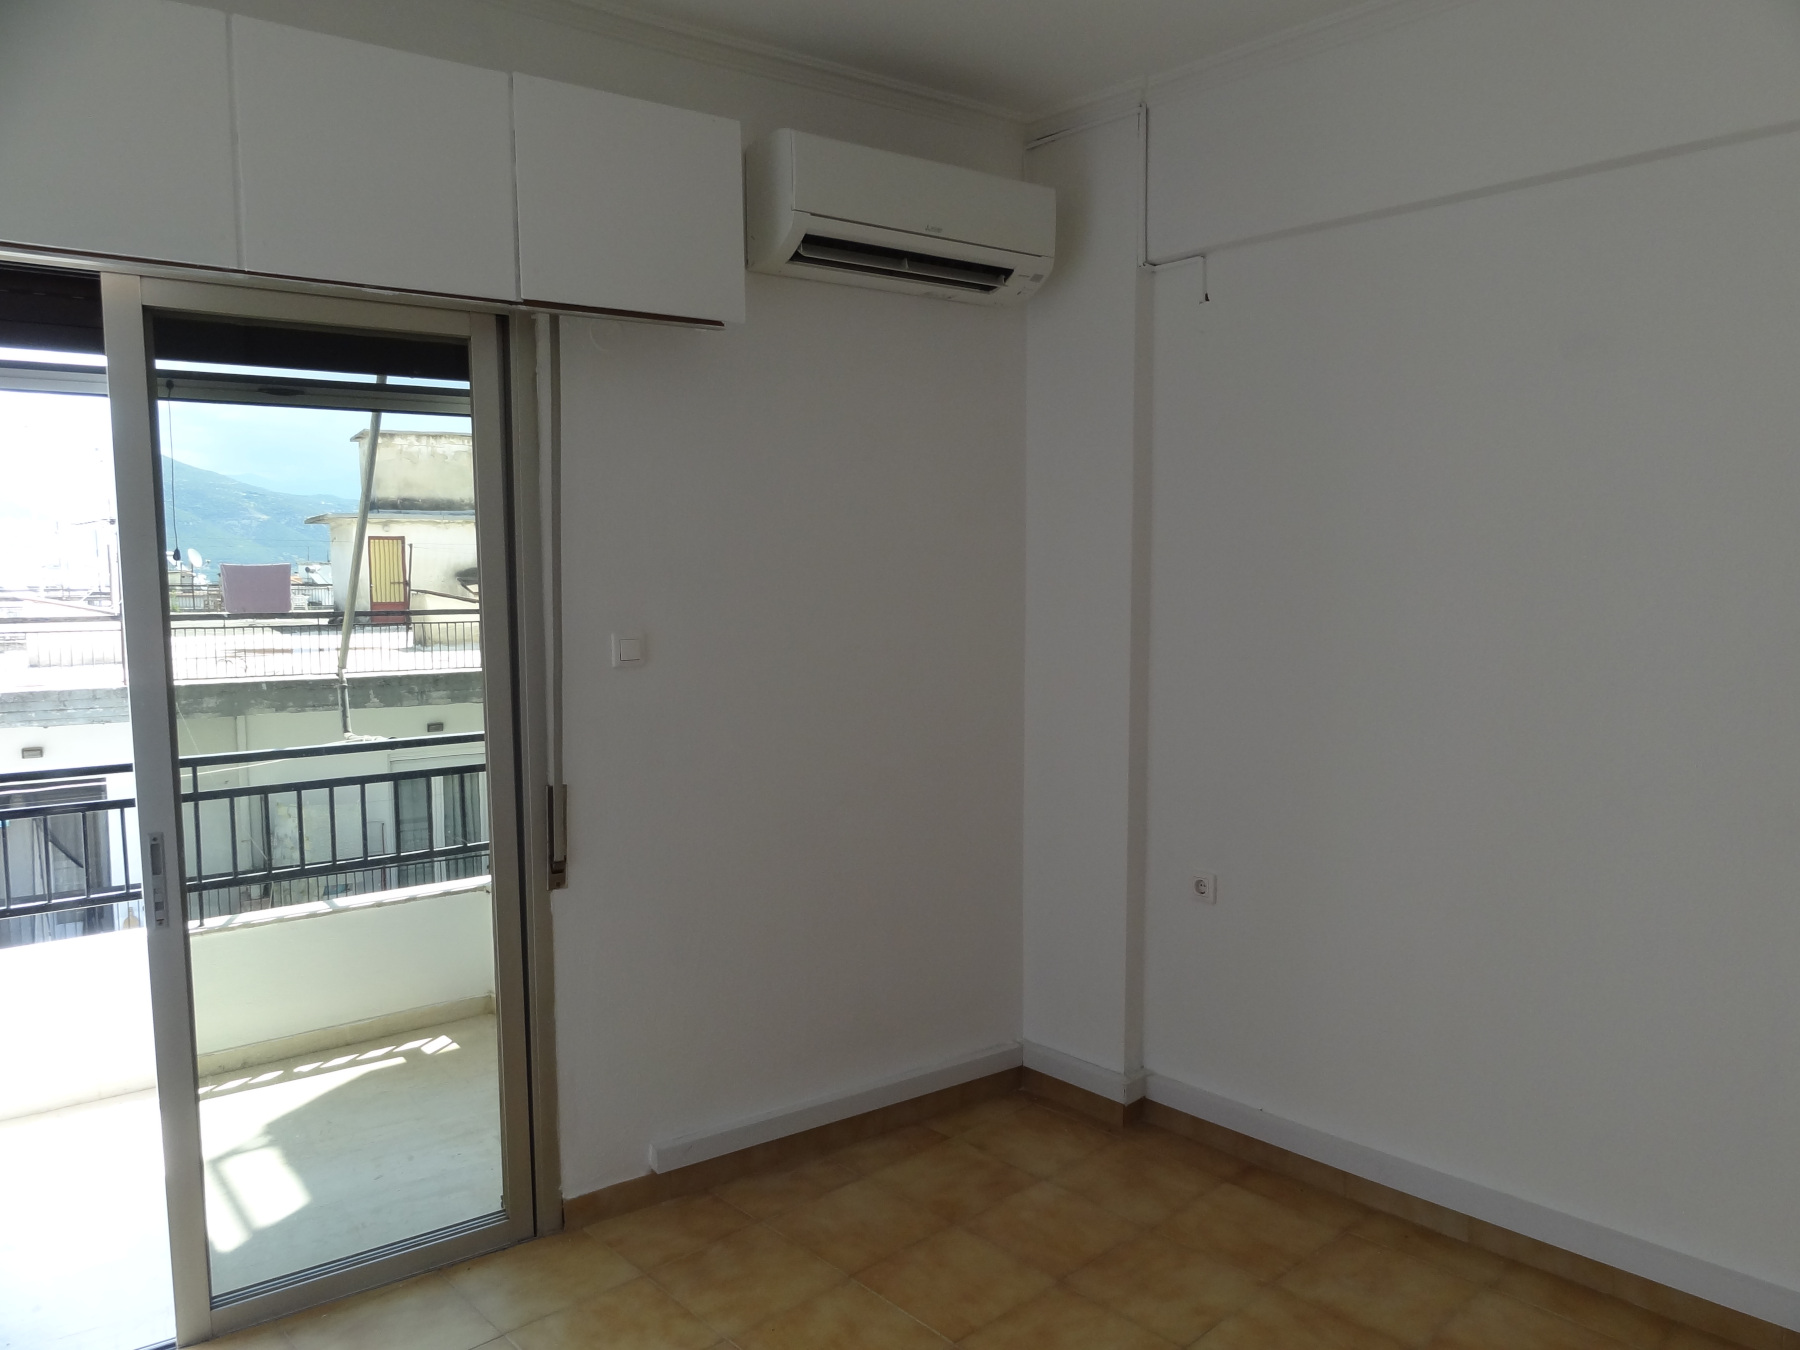 Two-rooms studio for rent, 32 sq.m. 3rd floor in the center of Ioannina near the Courthouse